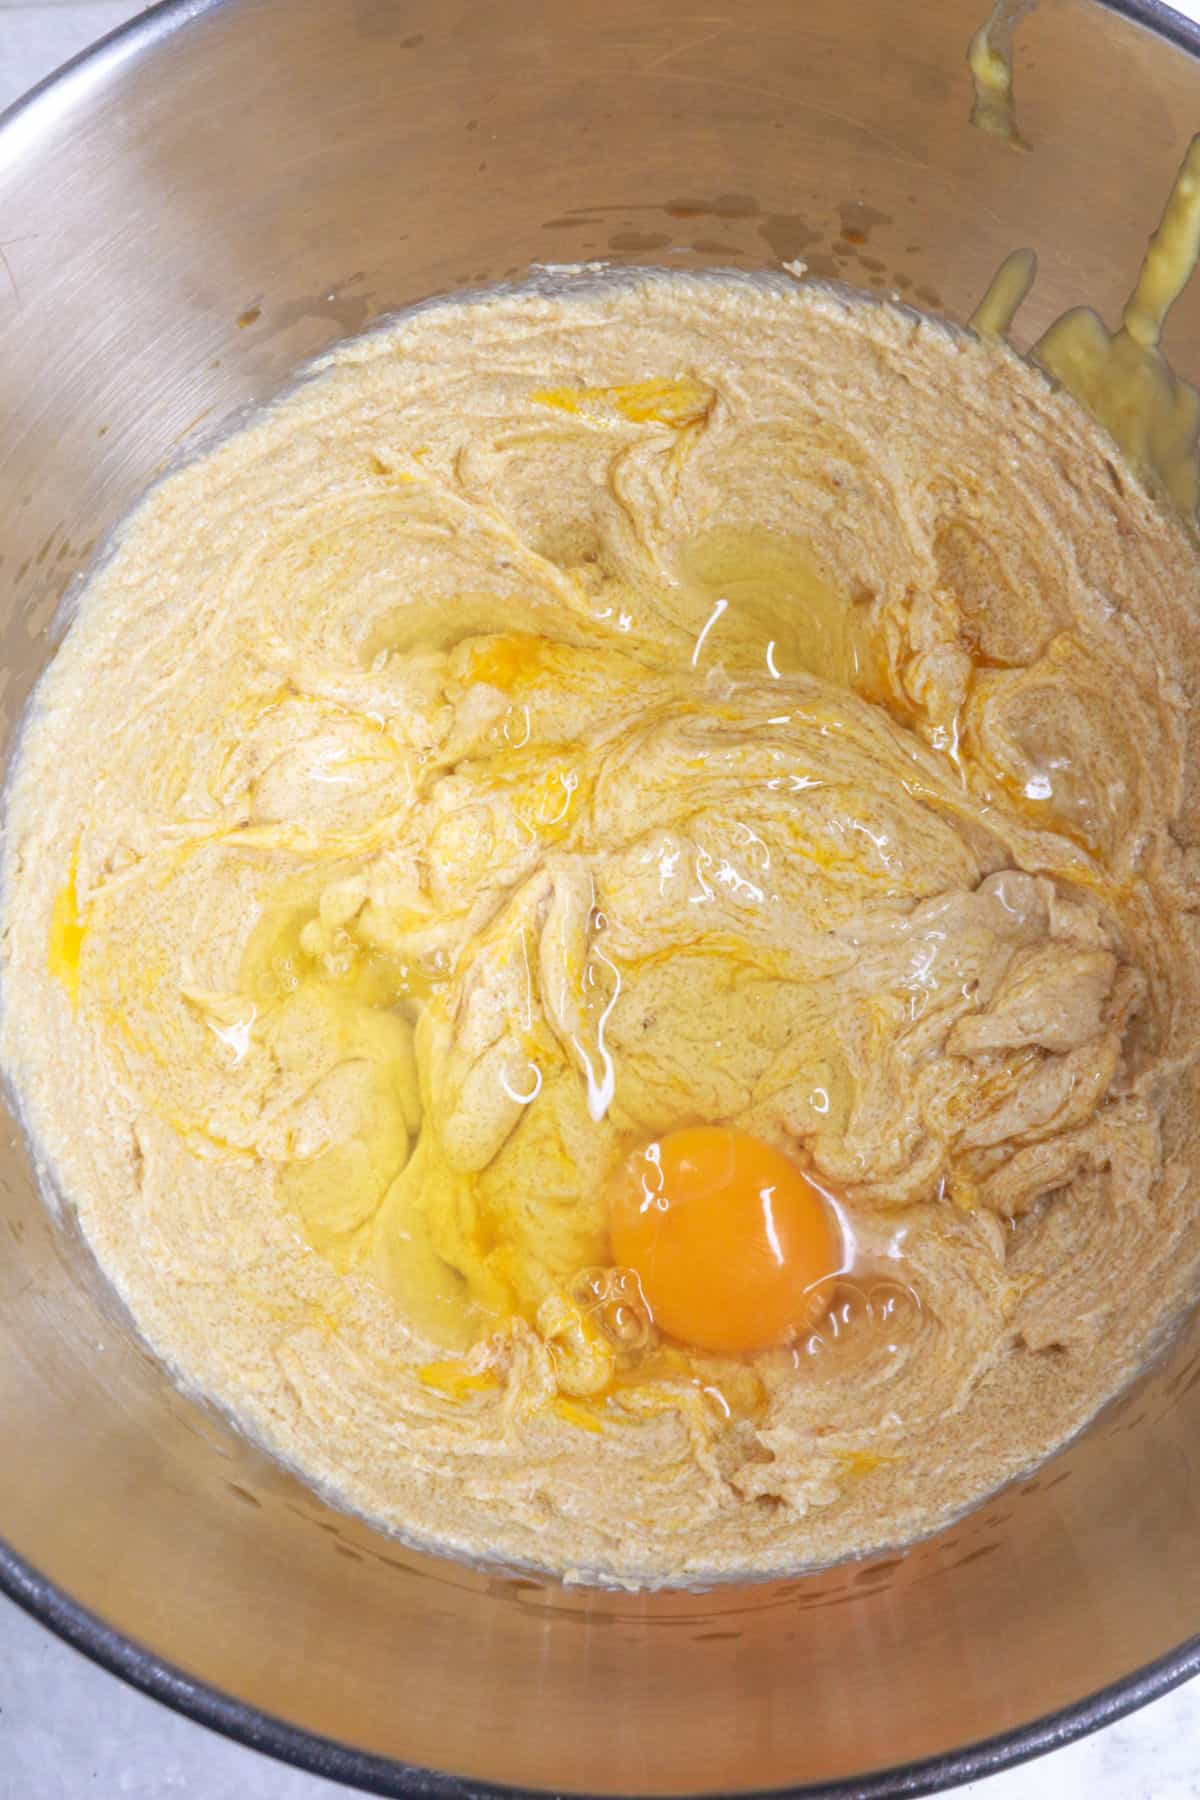 Mixing wet ingredients with eggs